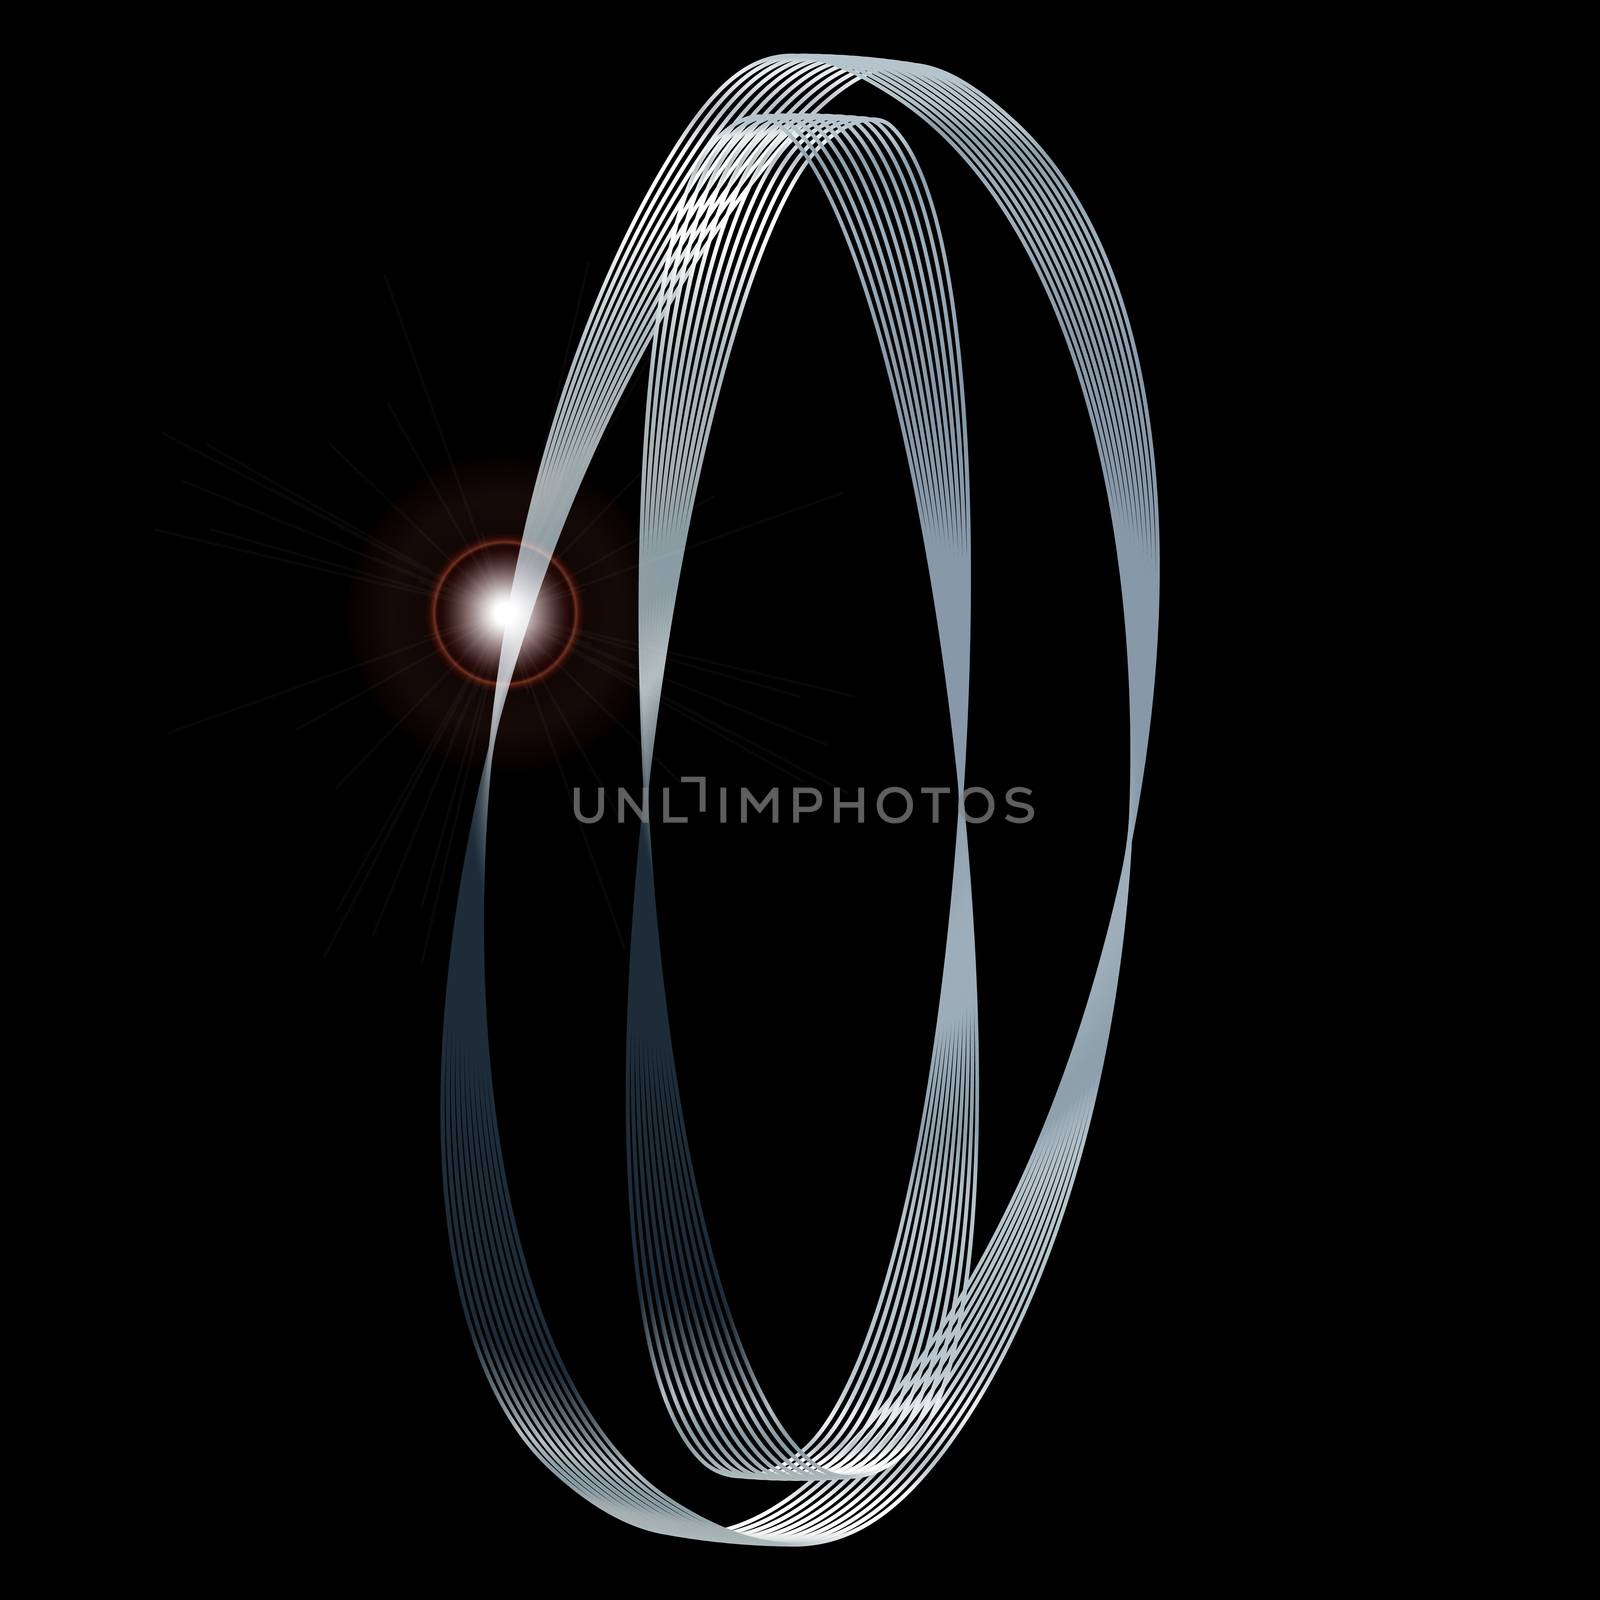 The number zero depicted in fine silver thread over a black background